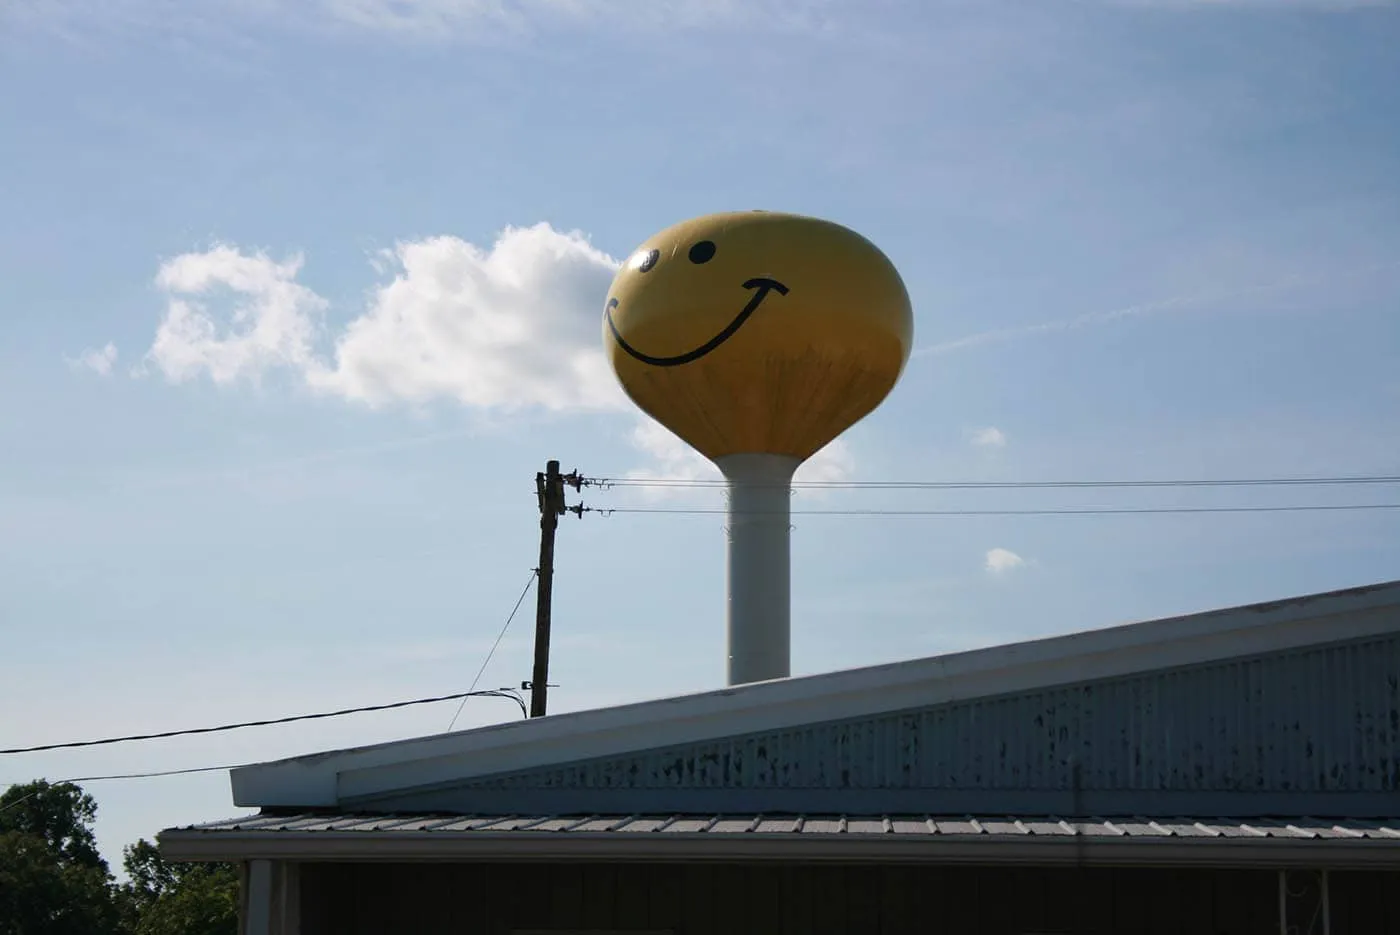 Smiley Face Water Tower in Atlanta, Illinois